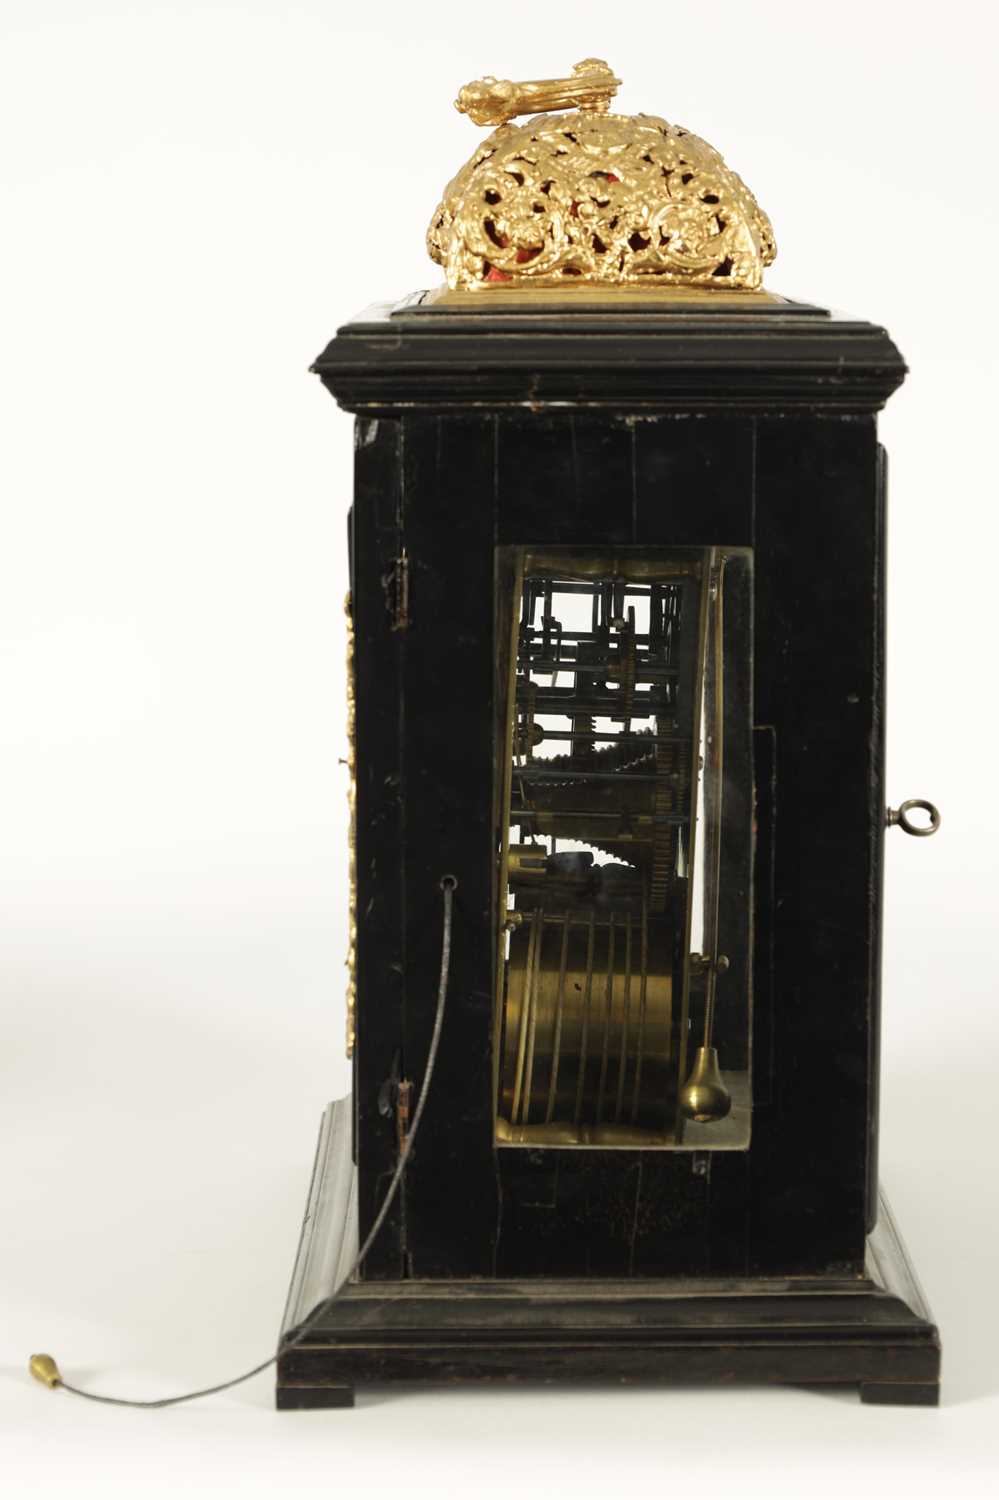 EDMUND APPLY, AT CHARING CROSS. A WILLIAM AND MARY EBONY VENEERED GILT BRASS MOUNTED BASKET TOP BRAC - Image 11 of 18